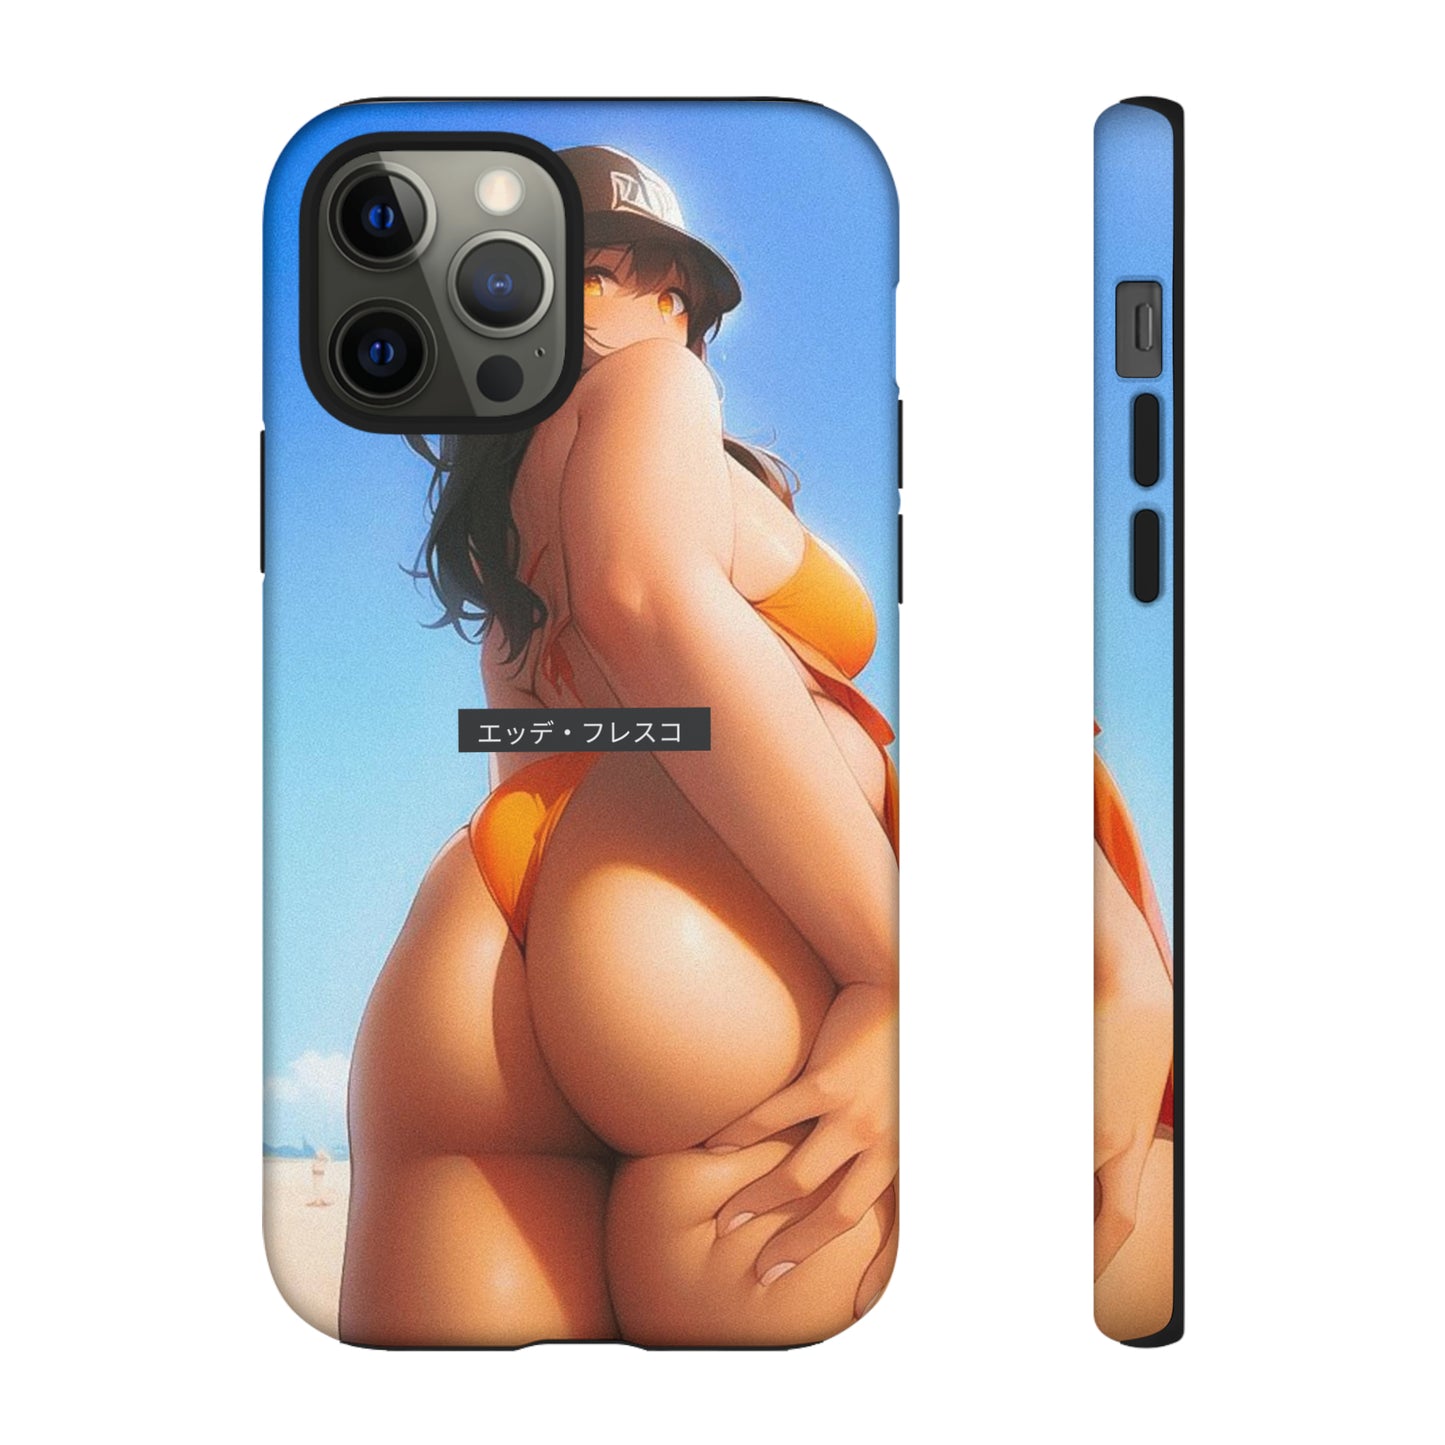 Anime Style Art Tough Cases- "Matching the Sunset"